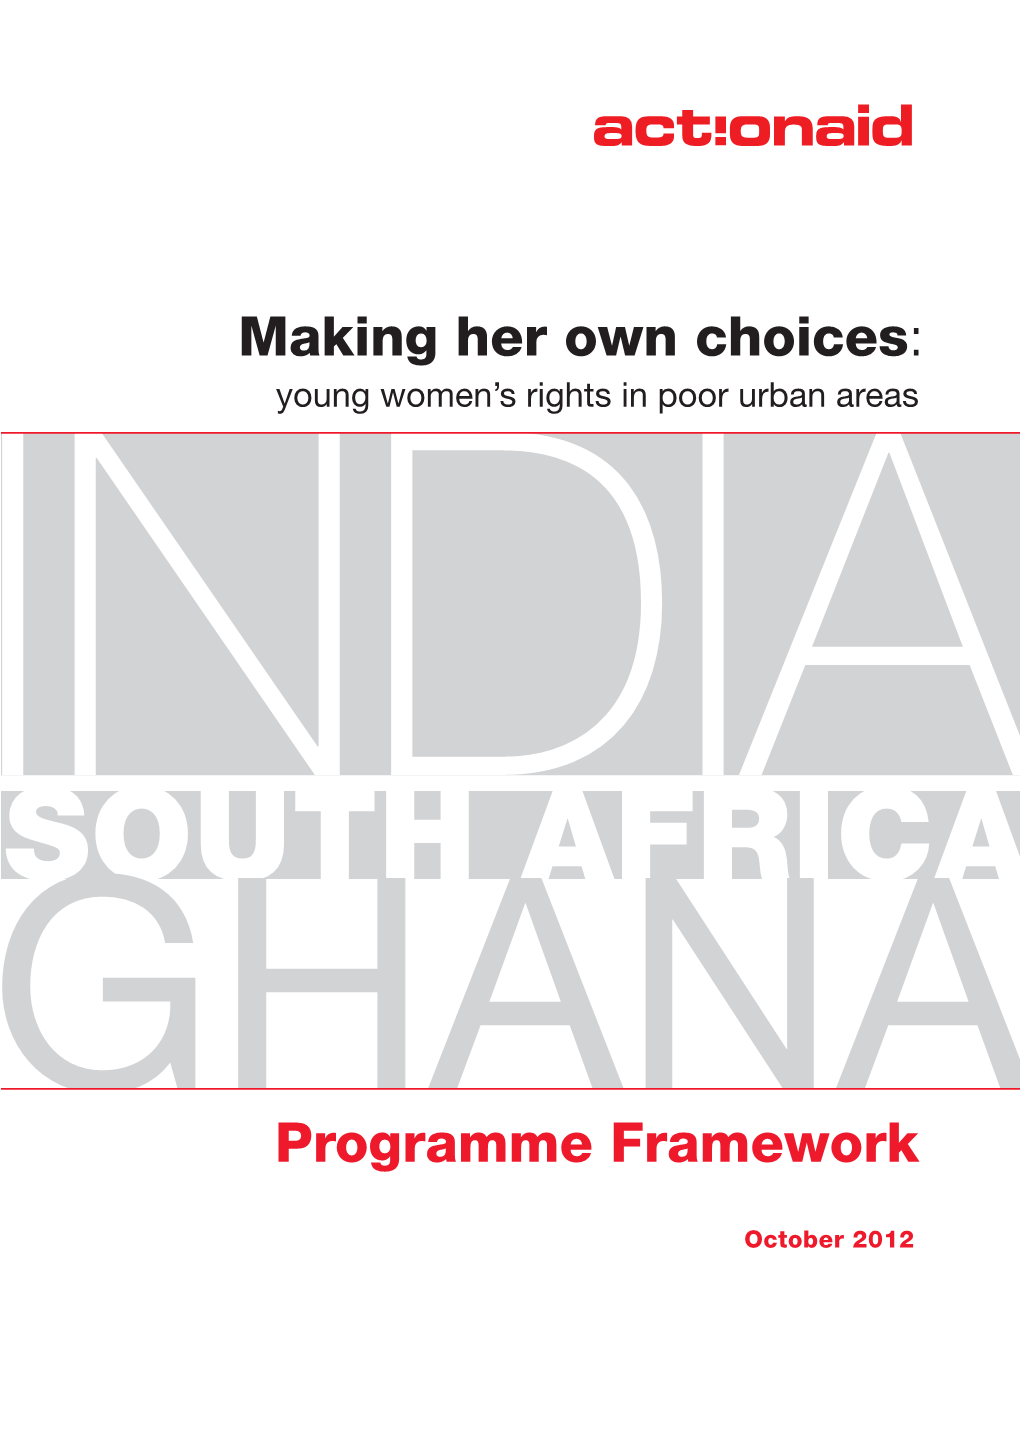 Making Her Own Choices: Programme Framework